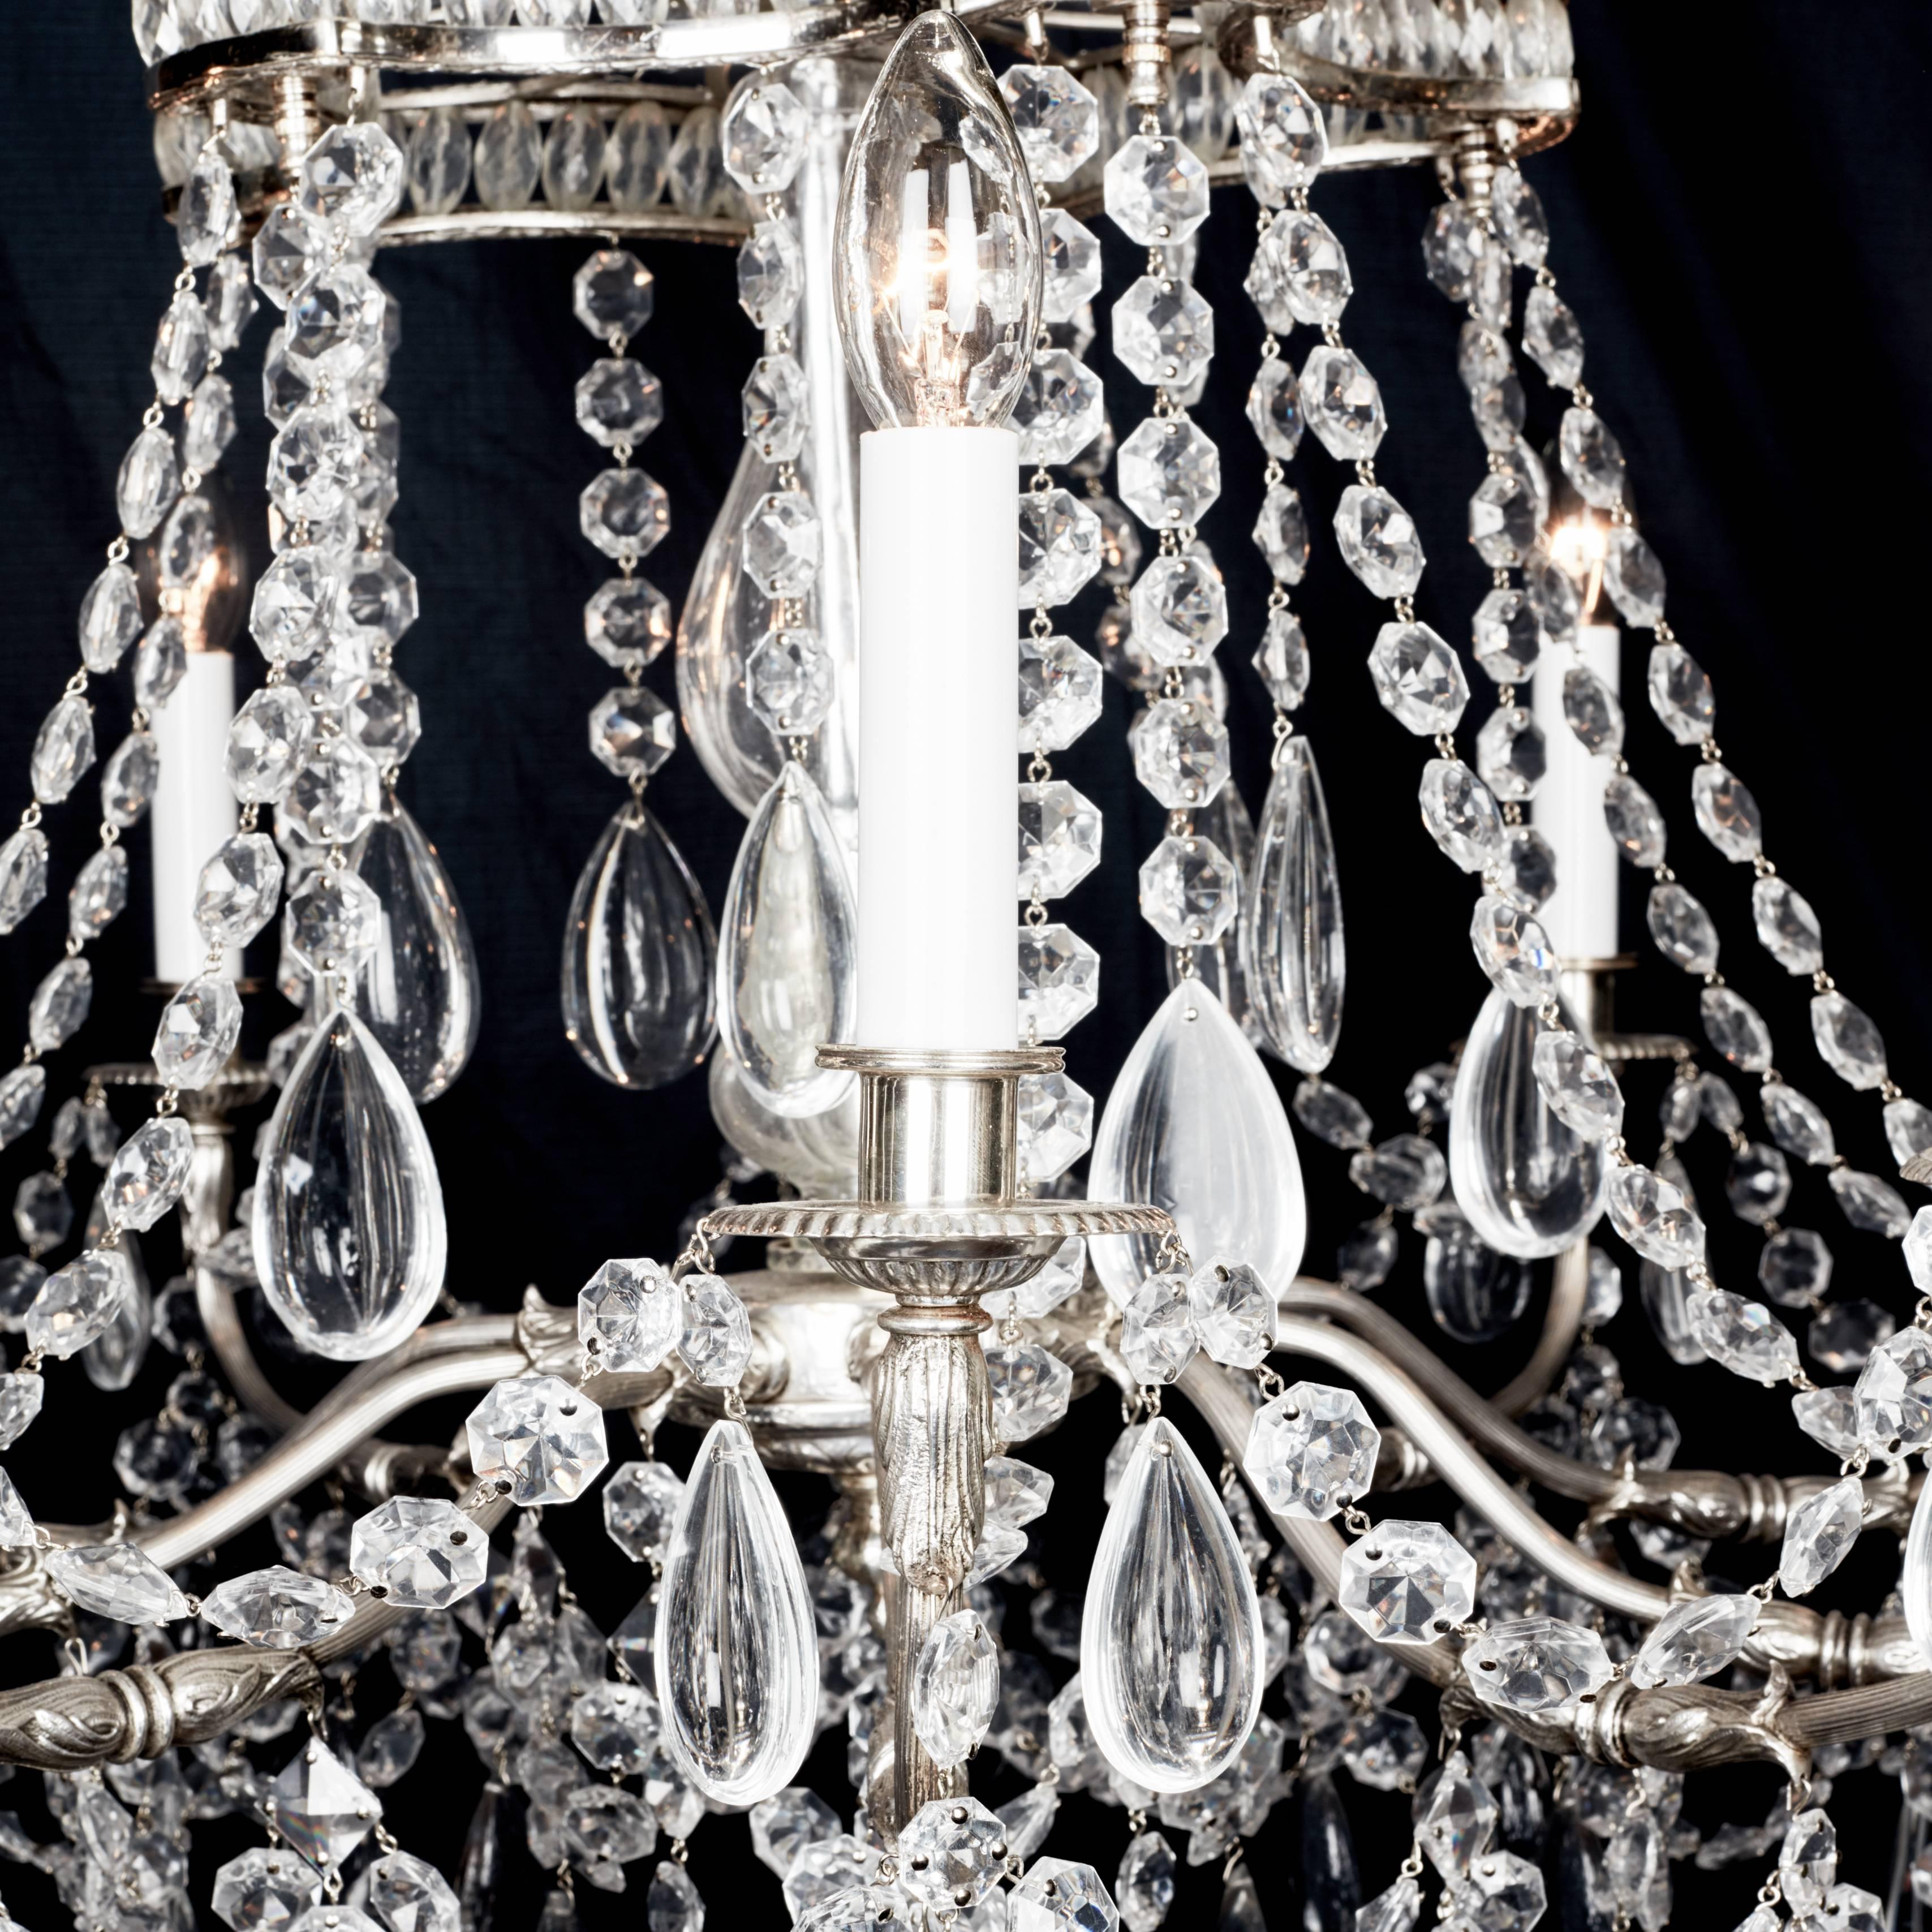 A Versailles Louis XVI style French chandelier
Silver ten-armed chandelier with outswept arms terminating in candle lights supported by chains and supporting a gallery hooped and separated by lozenge hand cut beads and hung on the lower section of